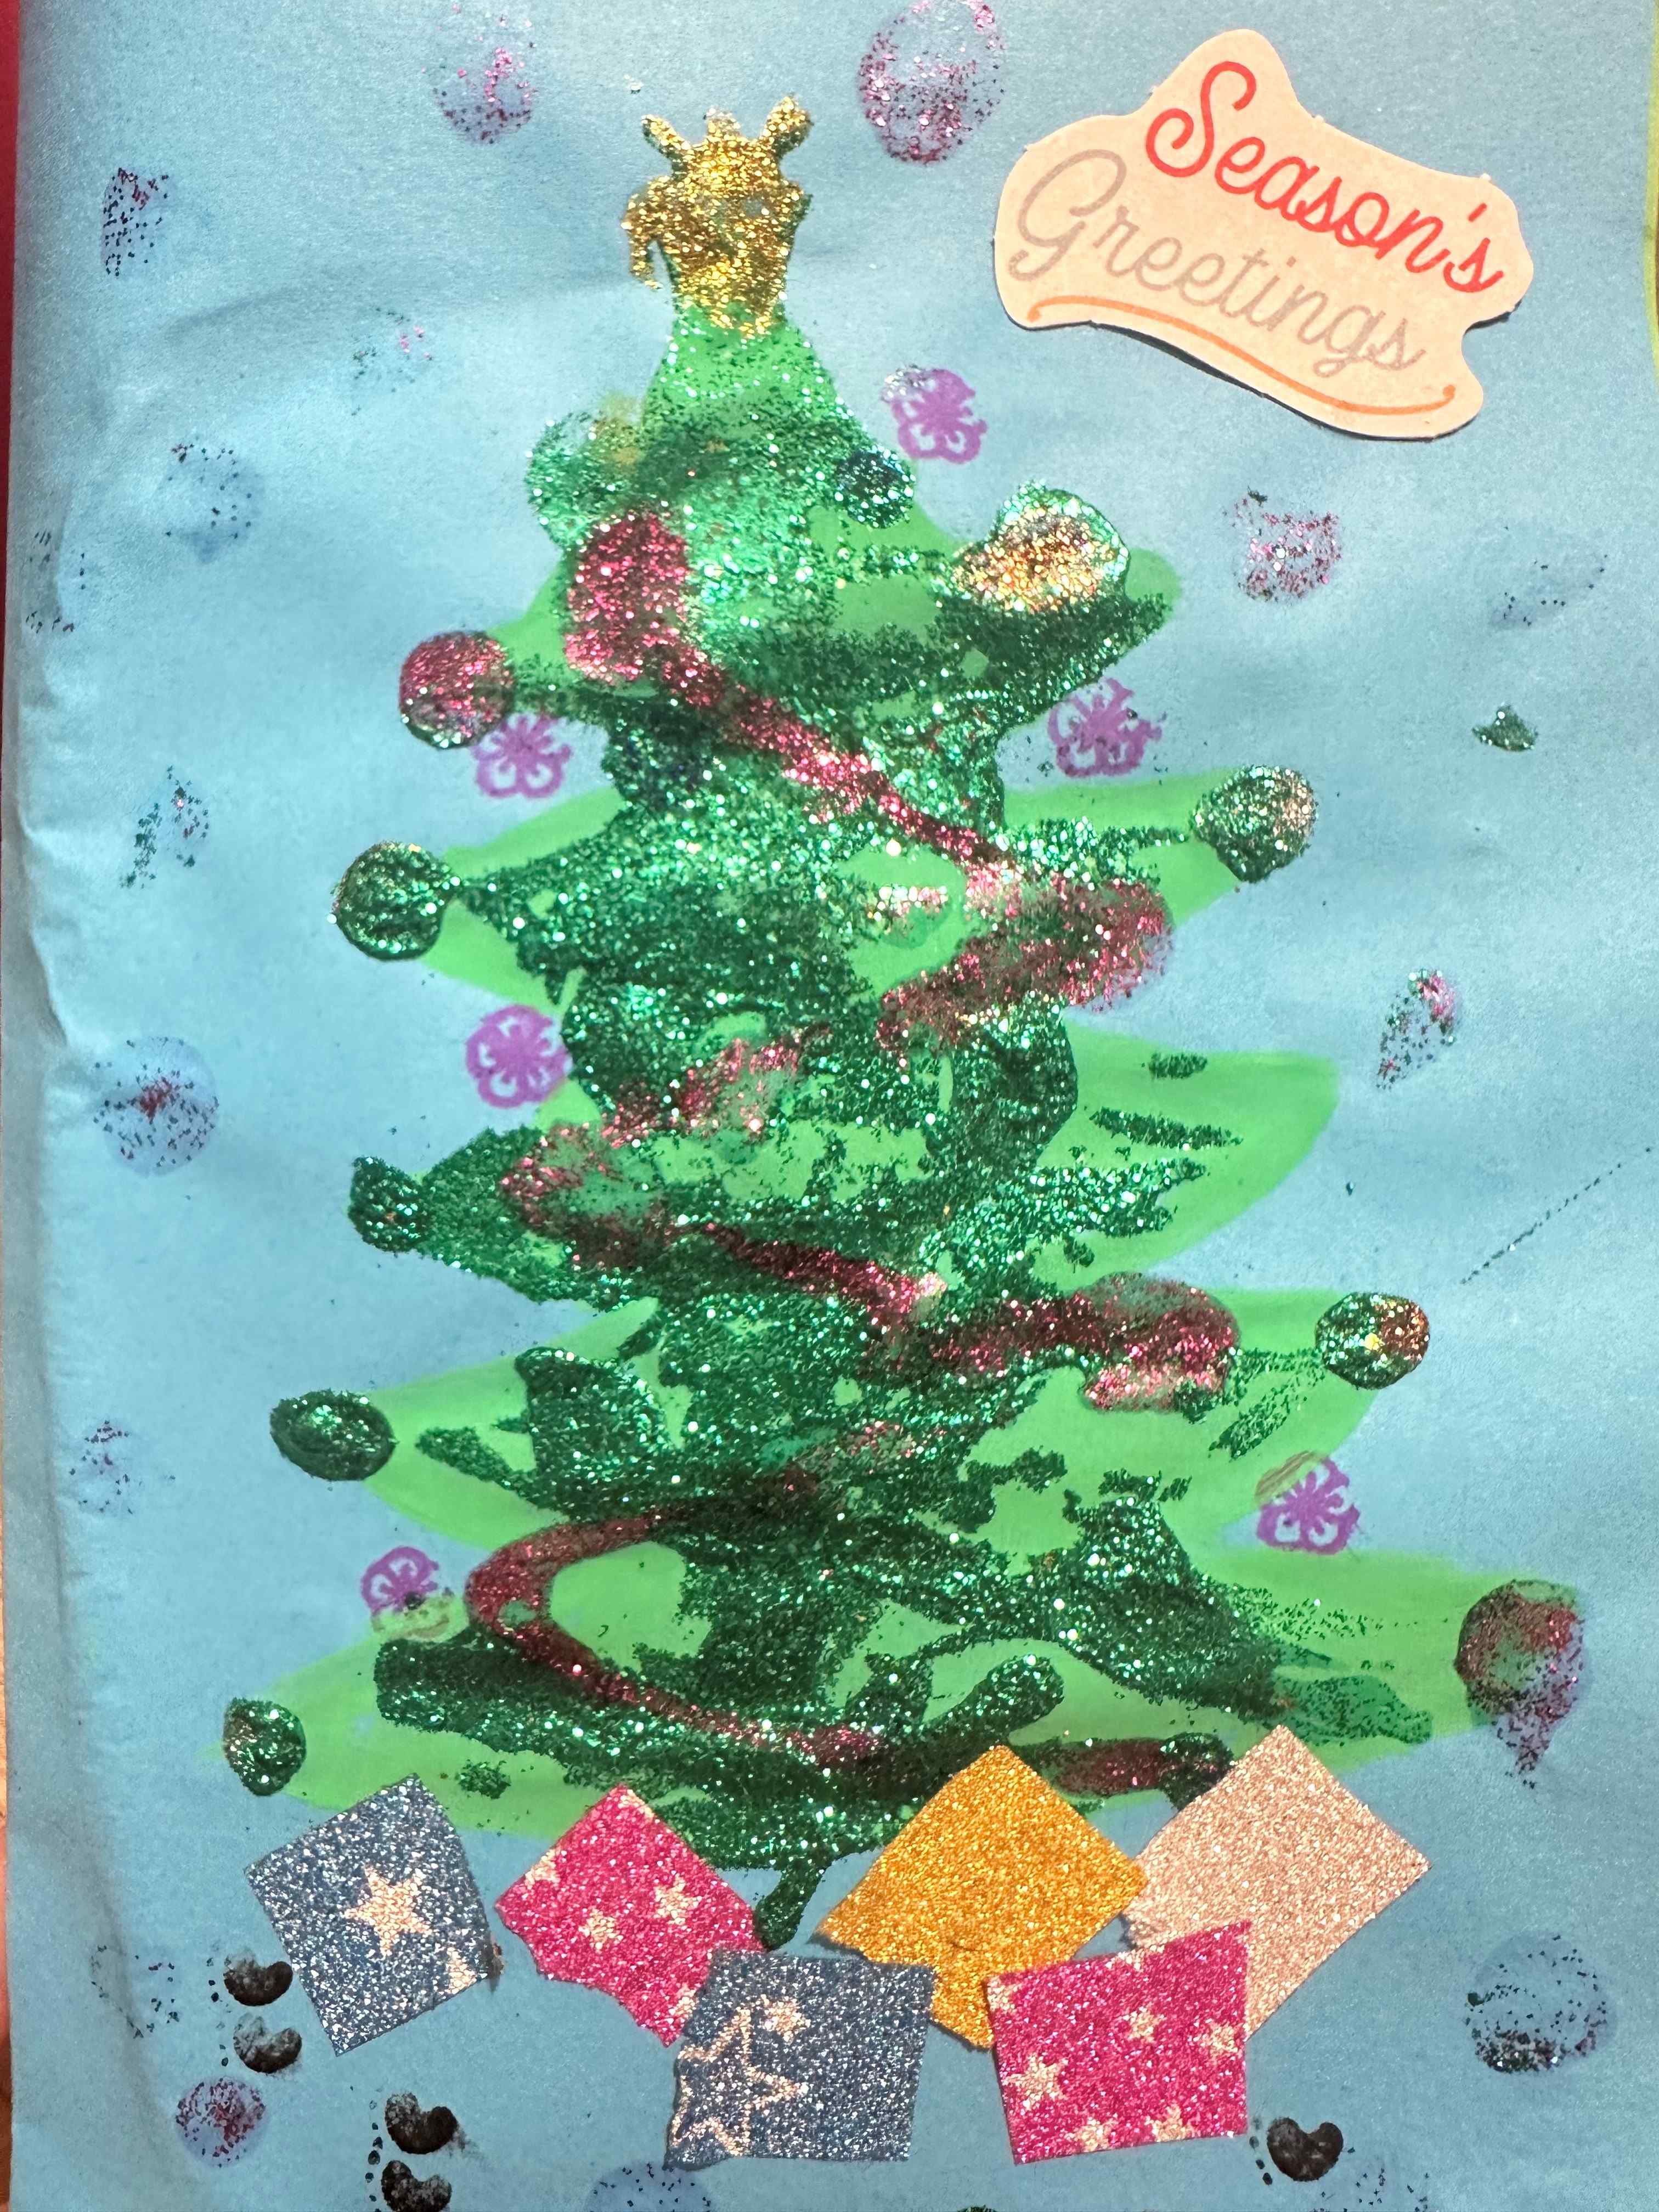 picture of a xmas tree drawn by competition entrant